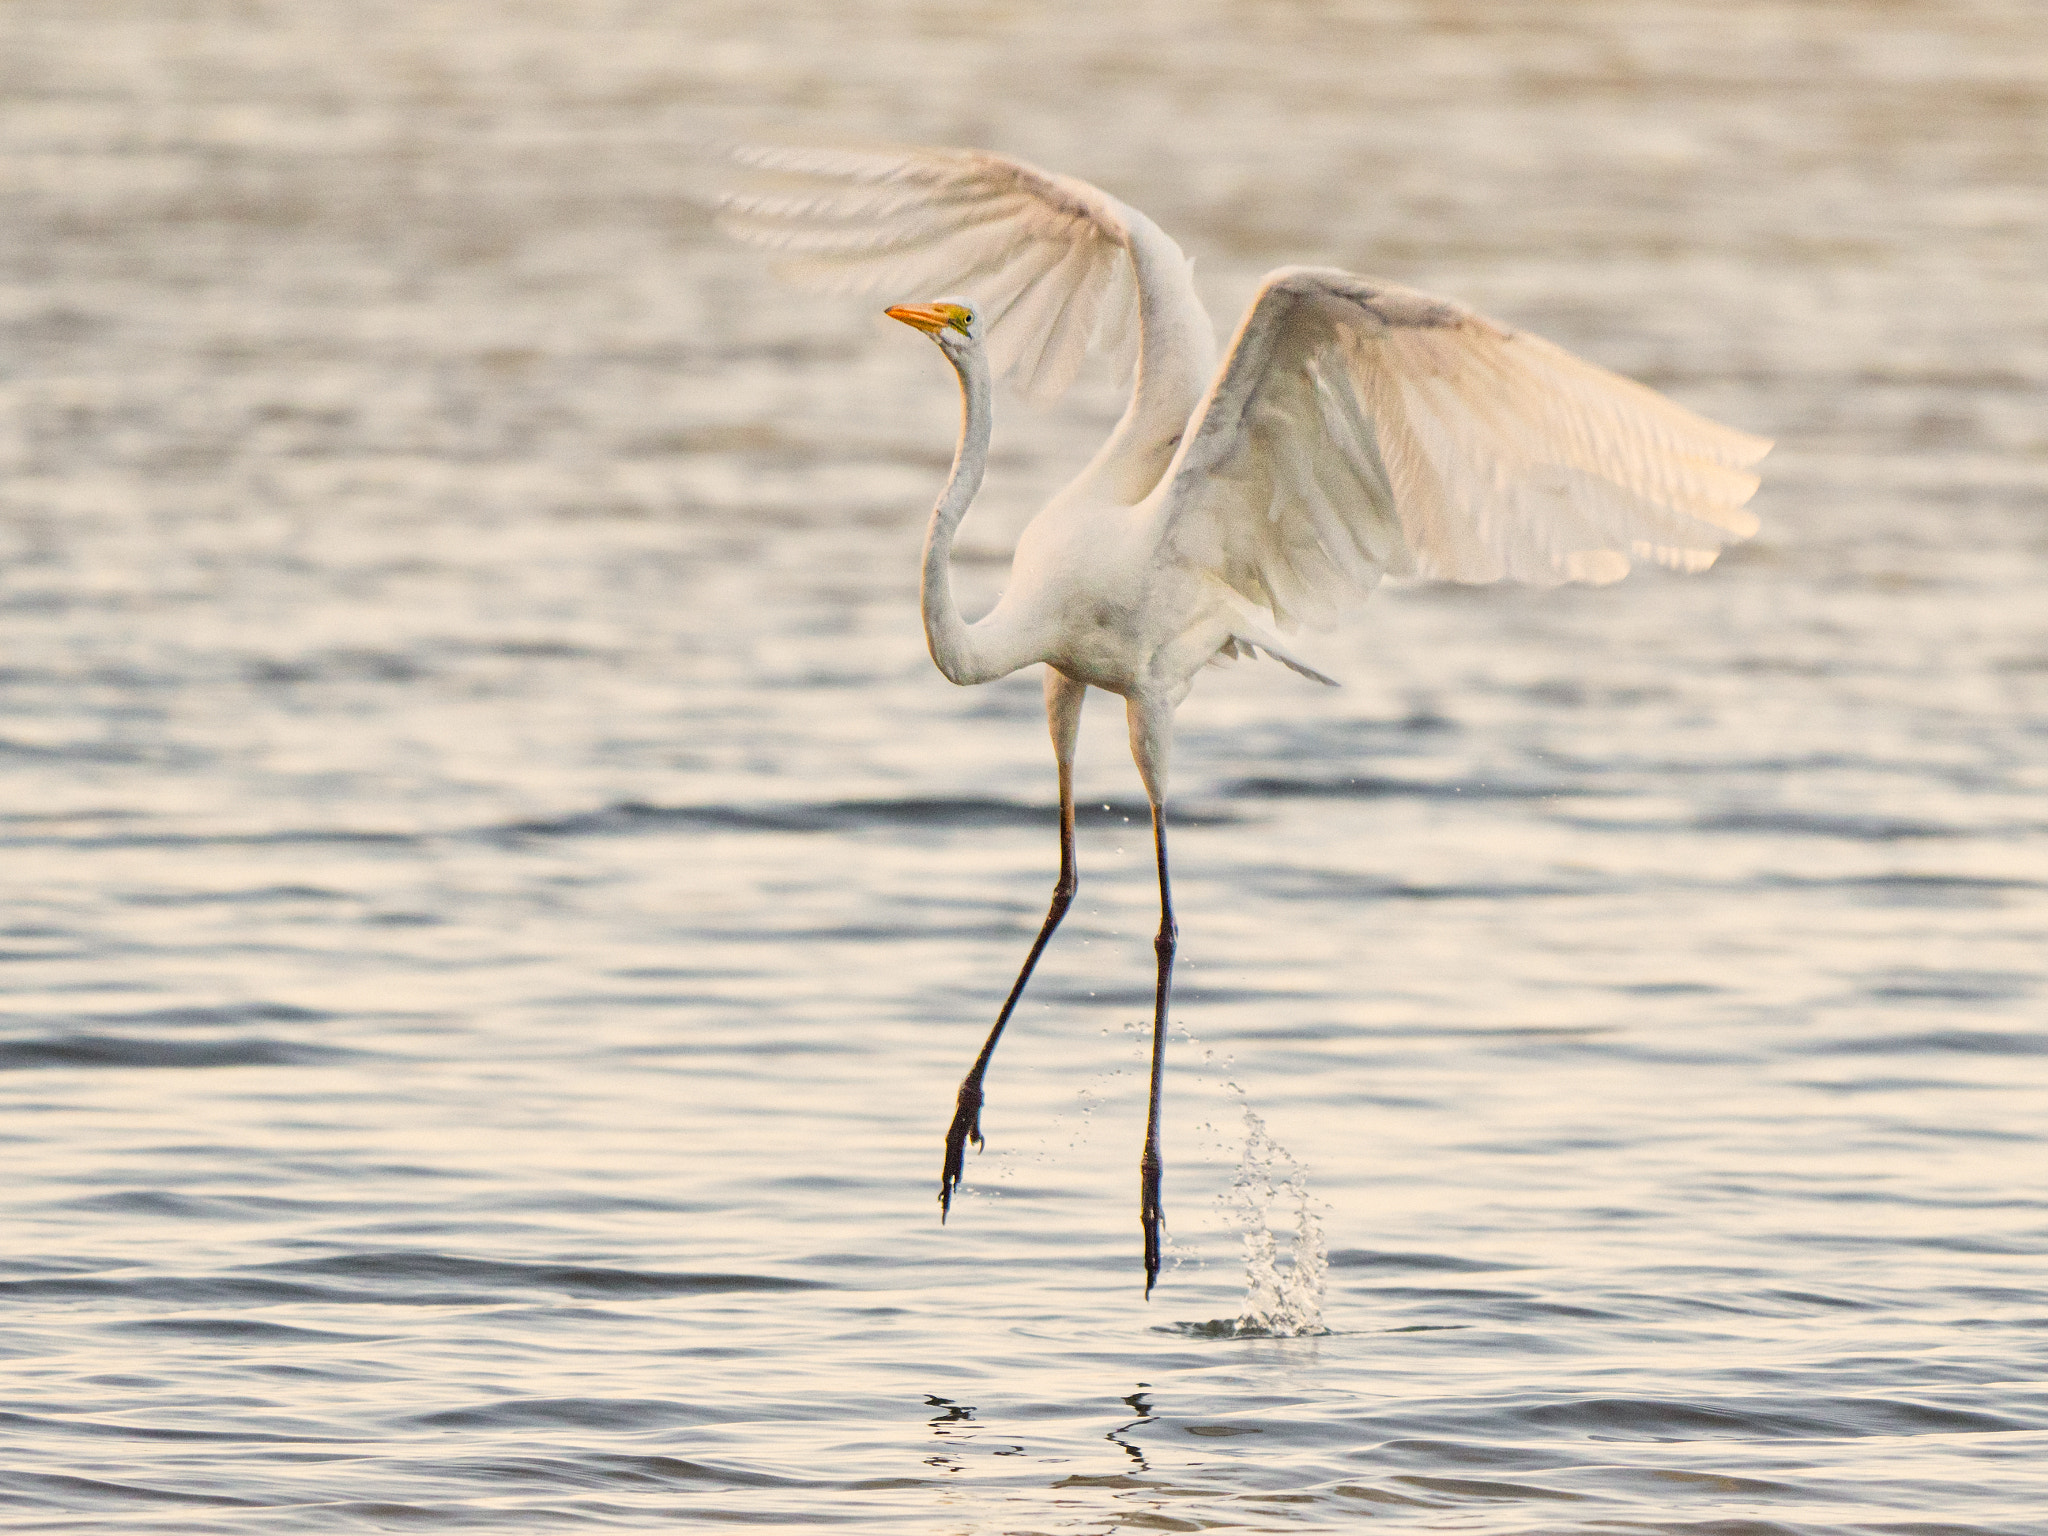 Great Egret by Paul Amyes on 500px.com